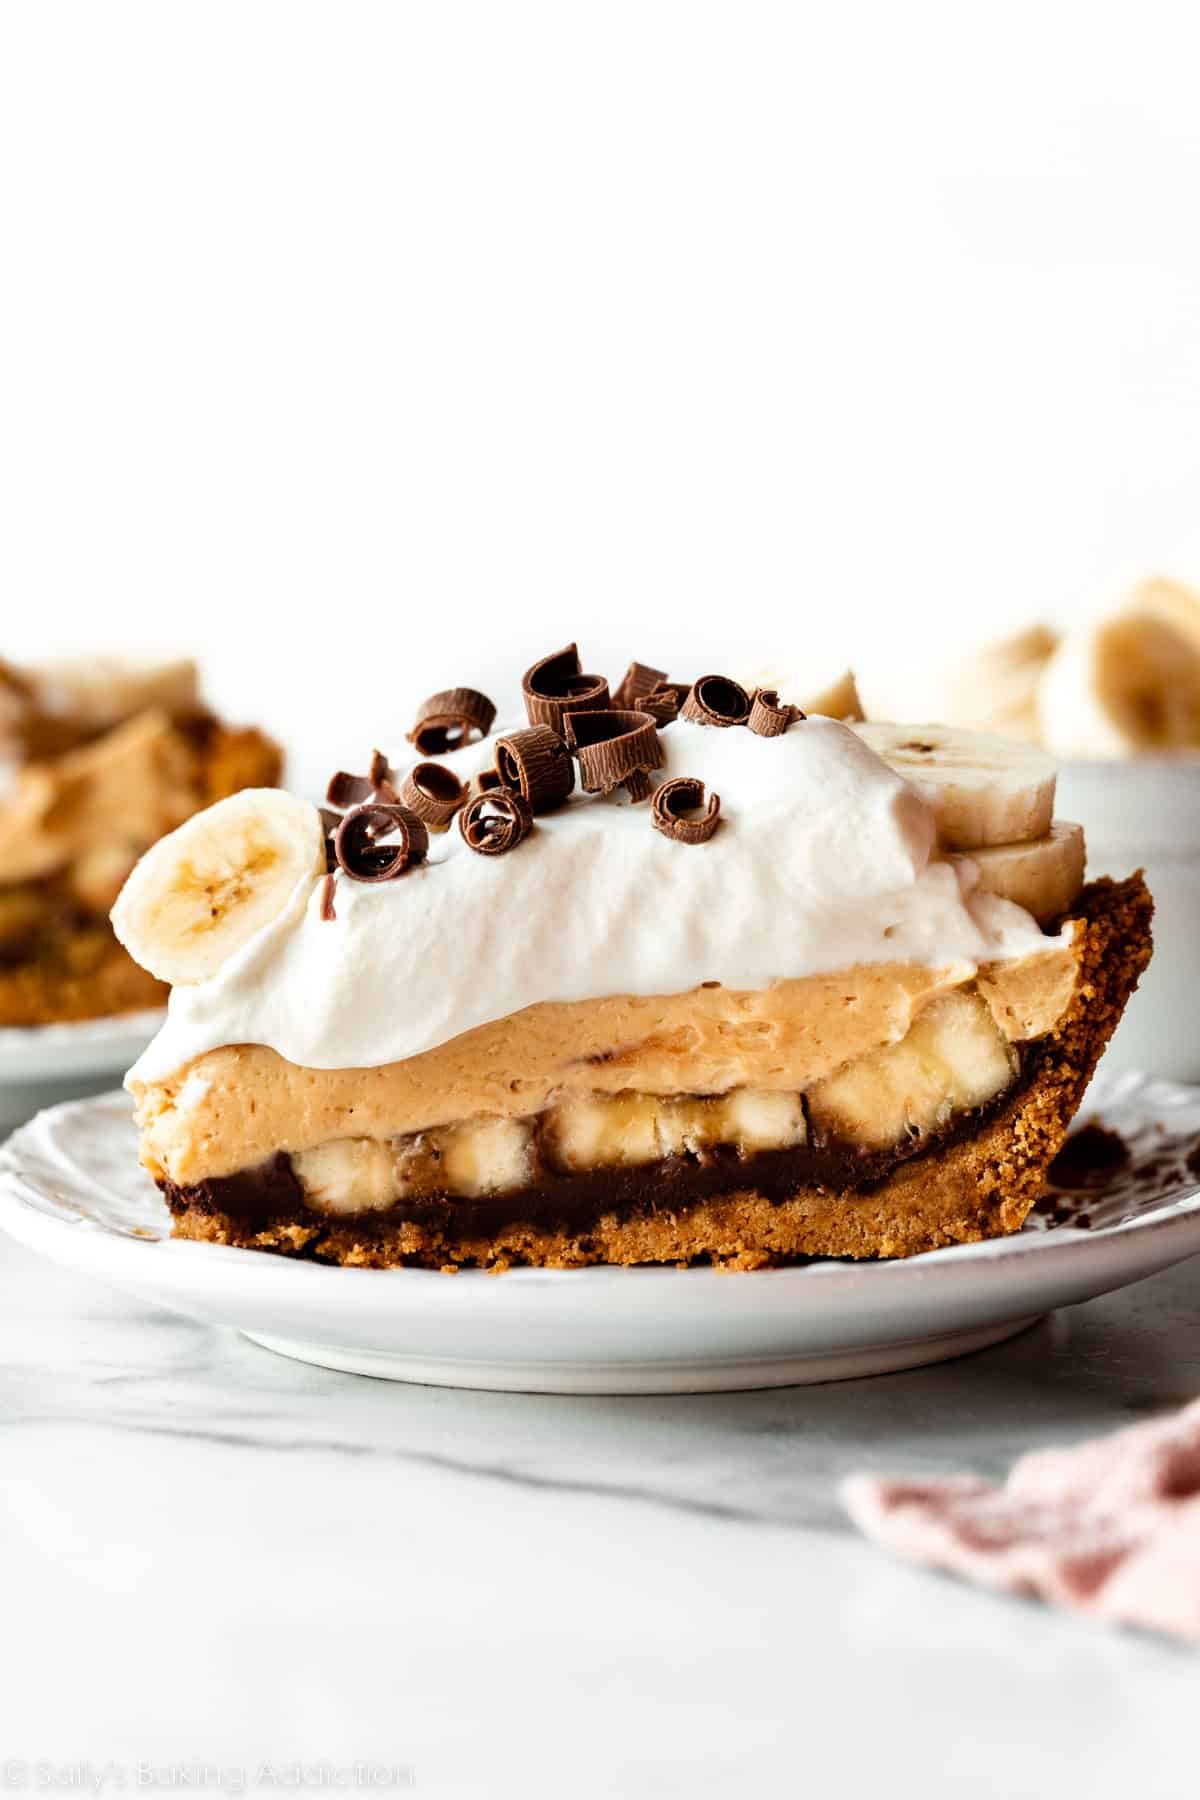 slice of pie on plate with layers of chocolate ganache, bananas, peanut butter, and whipped cream with chocolate curls.